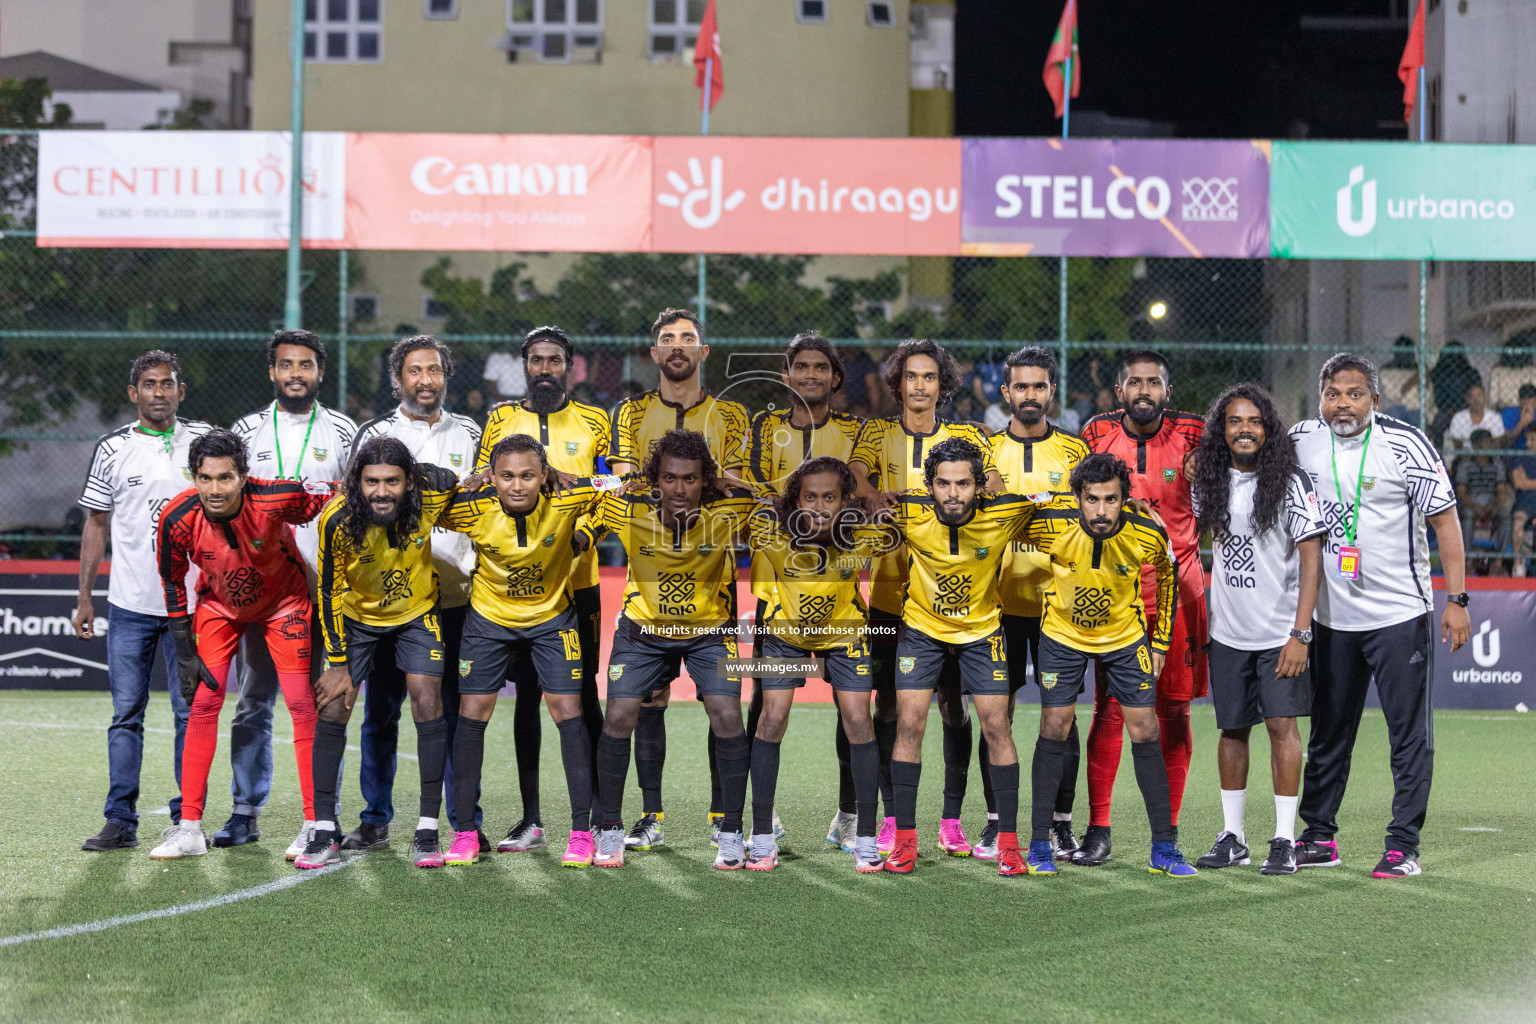 WAMCO vs Ooredoo in Club Maldives Cup 2023 held in Hulhumale, Maldives, on Thursday, 27th July 2023 Photos: Shu/ images.mv